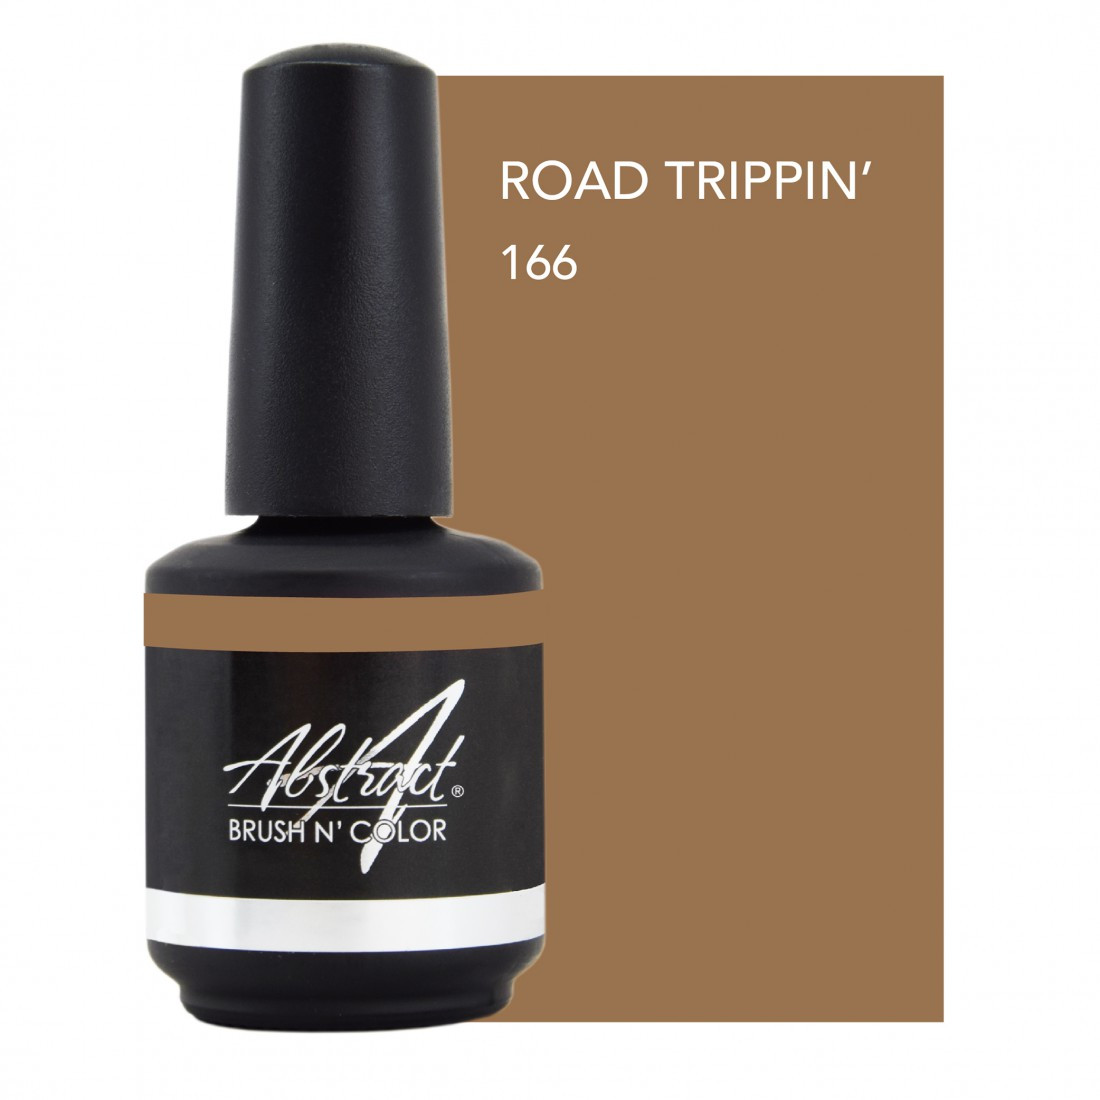 Abstract Road trippin' 15 ml